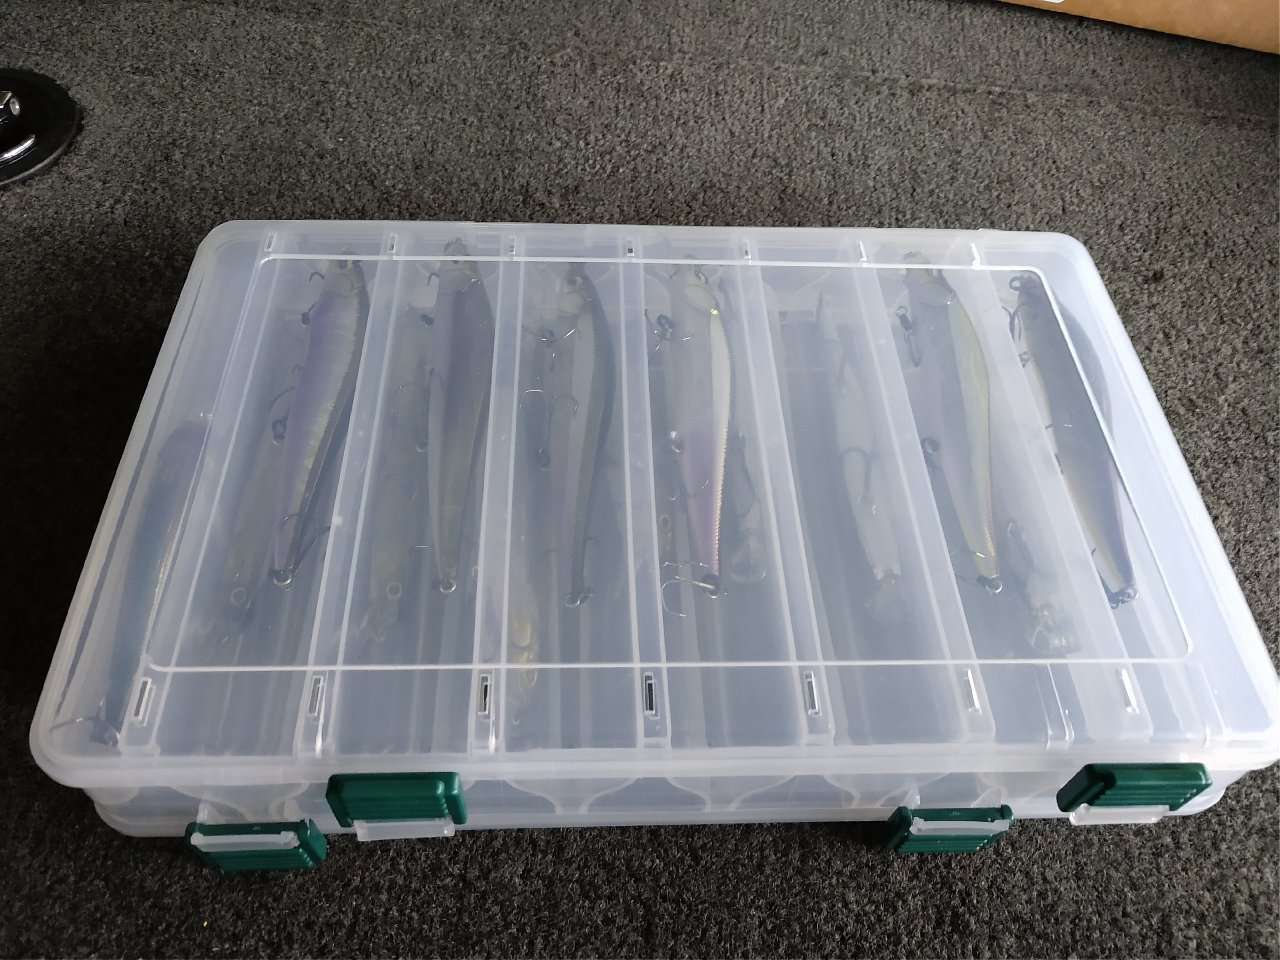 Show off your trays! - Page 2 - Fishing Tackle - Bass Fishing Forums